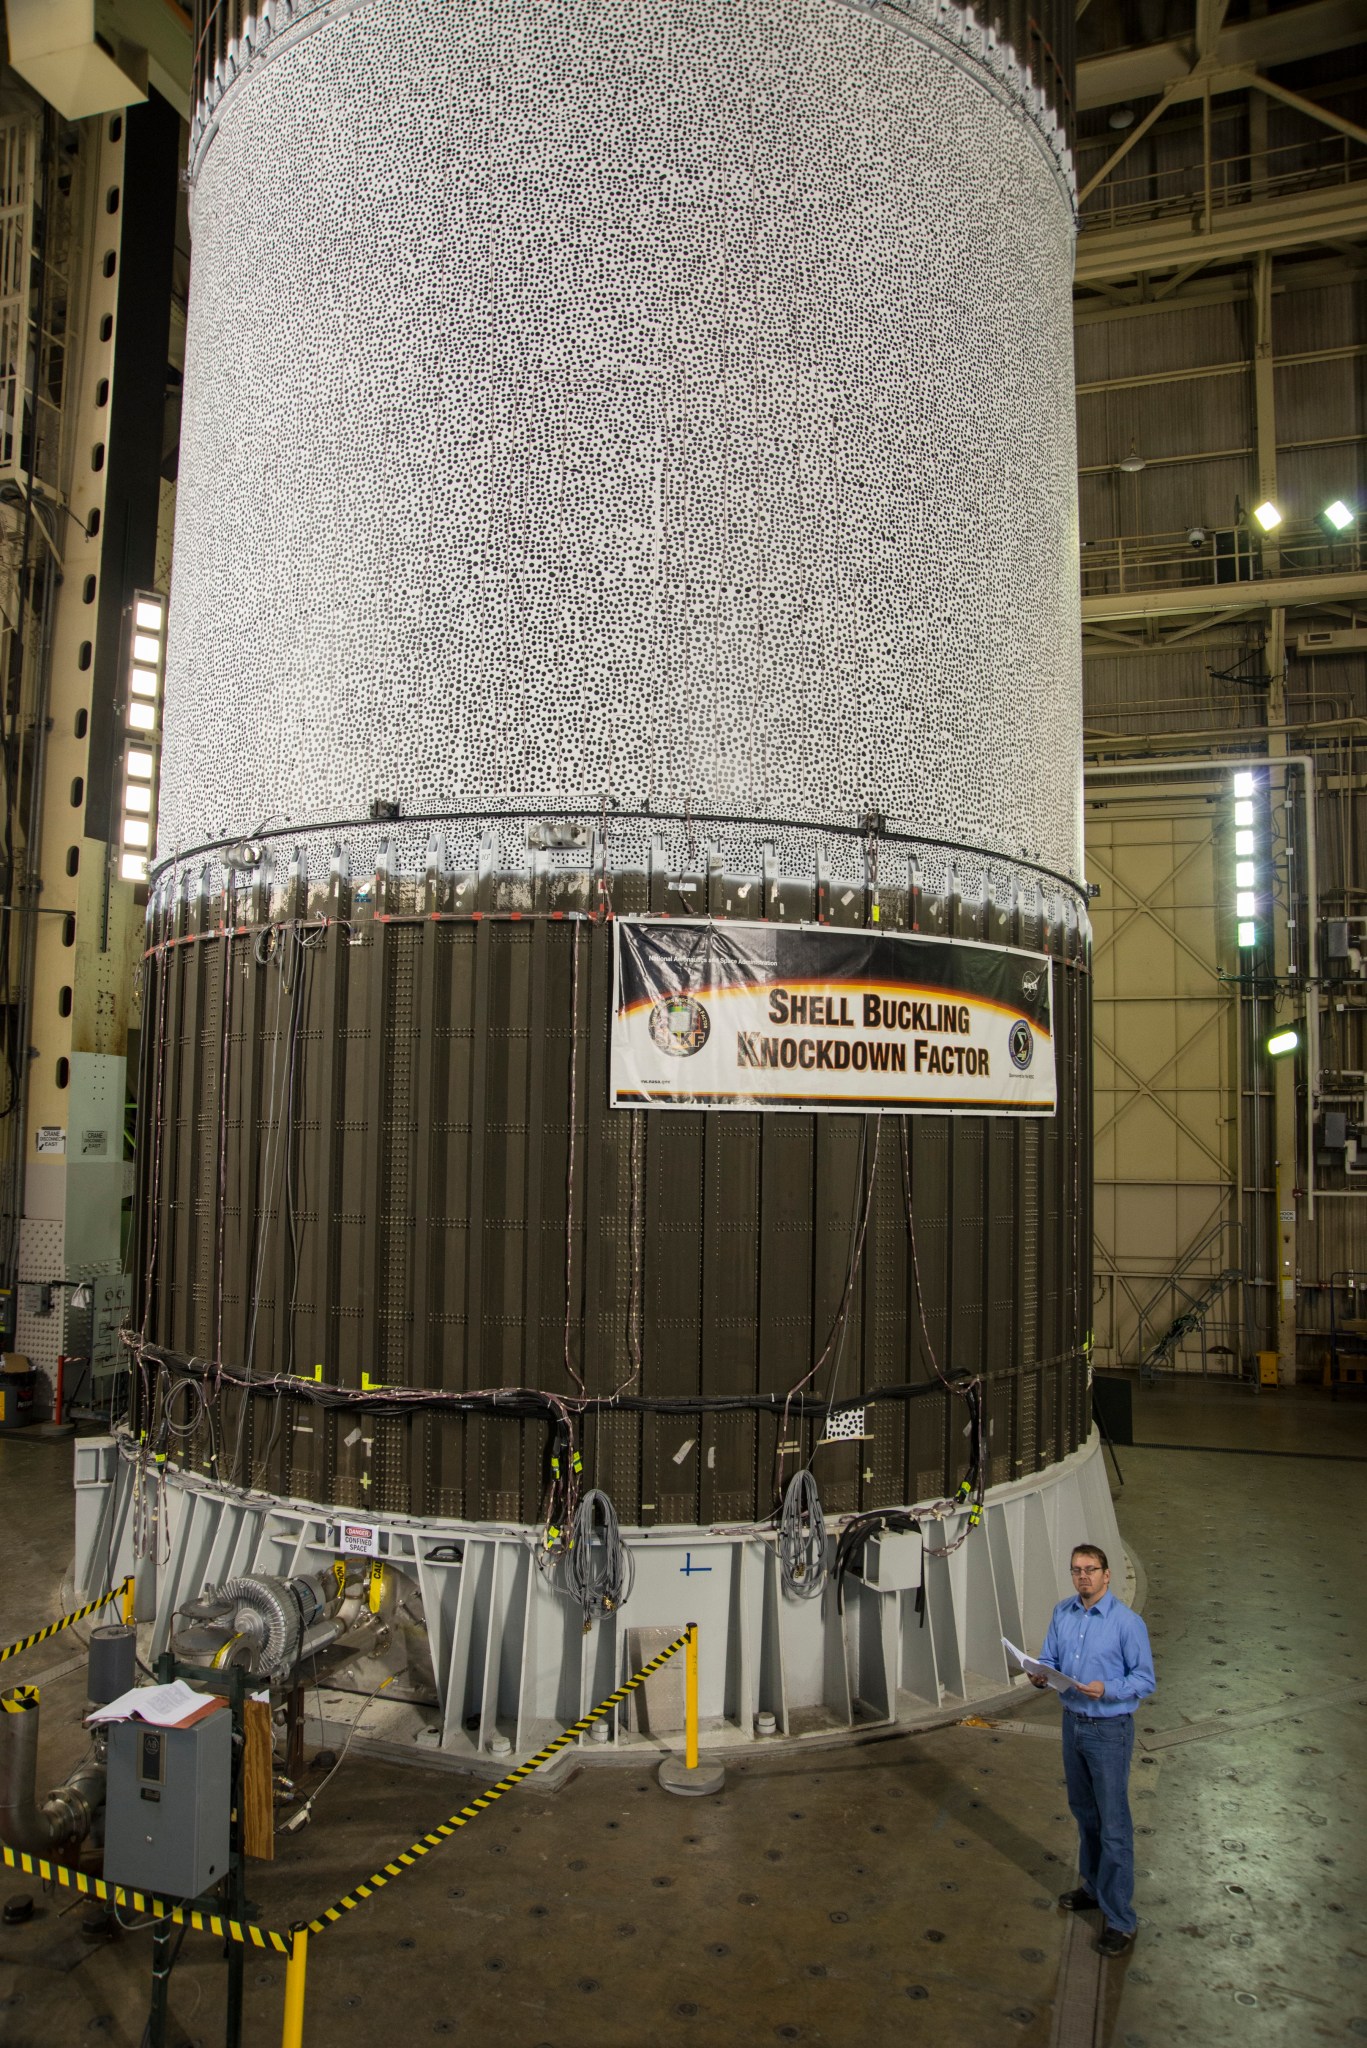 NASA engineers buckled an aluminum-lithium cylinder similar in size to fuel tanks for the largest rockets ever built.